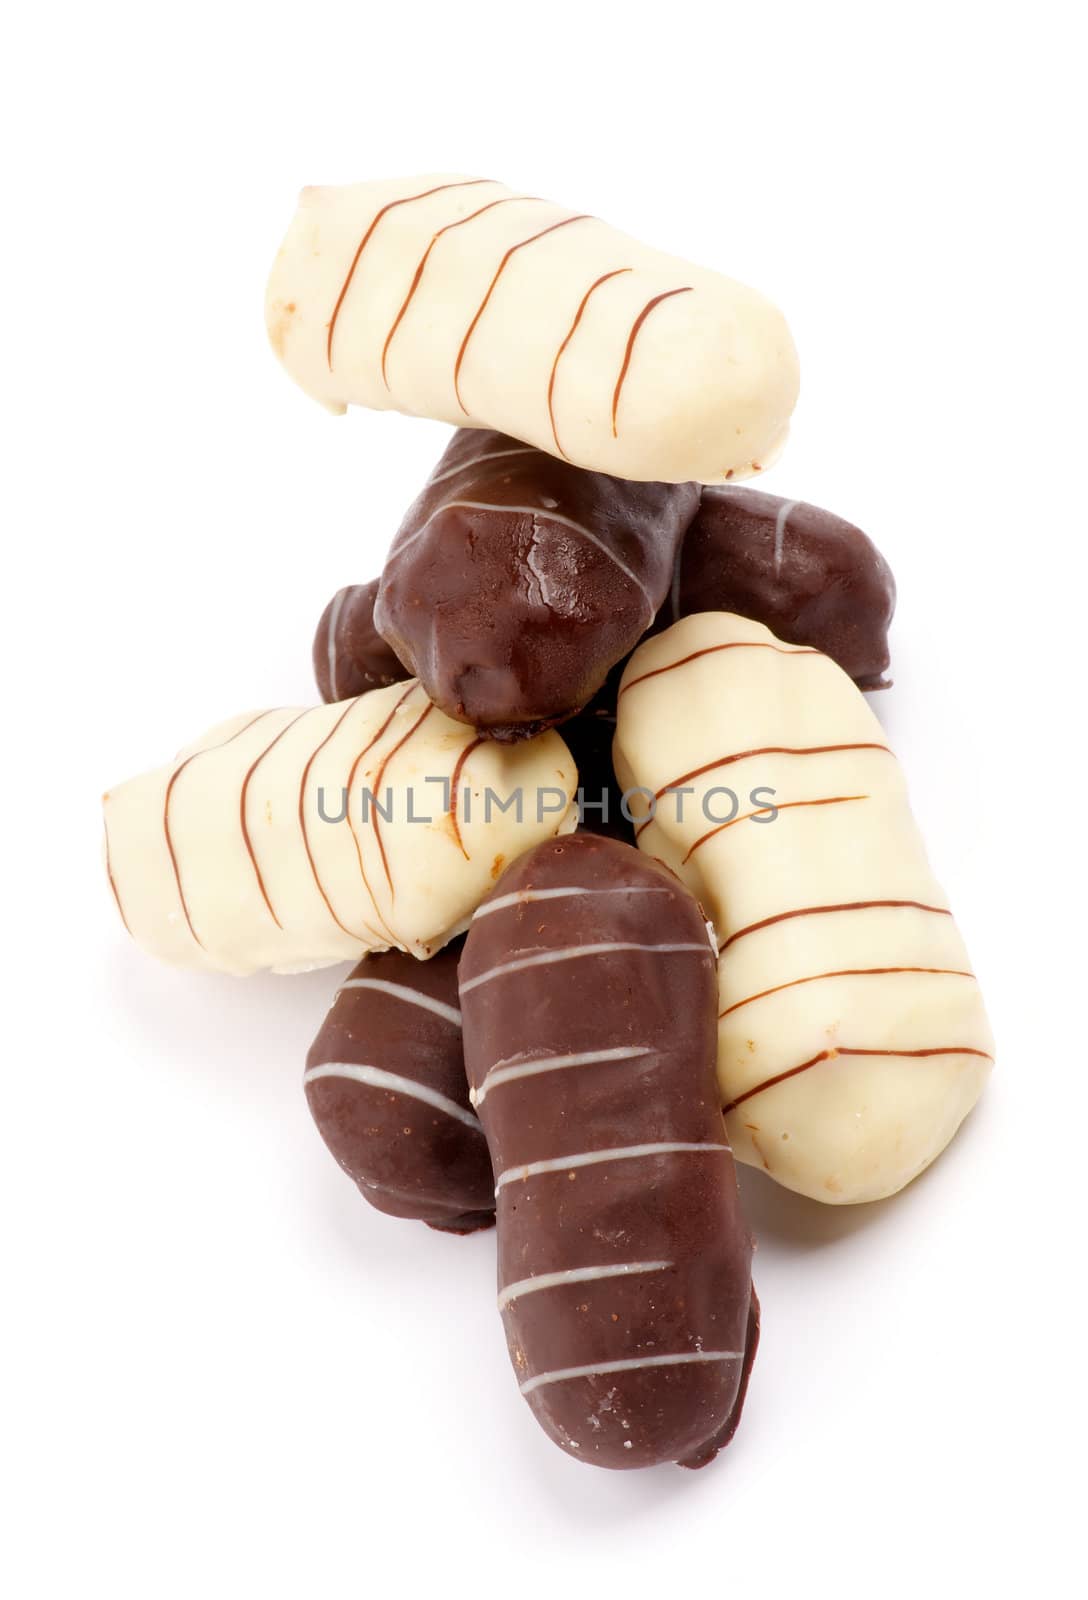 Heap of Eclairs with Dark and White Chocolate Glaze isolated on white background